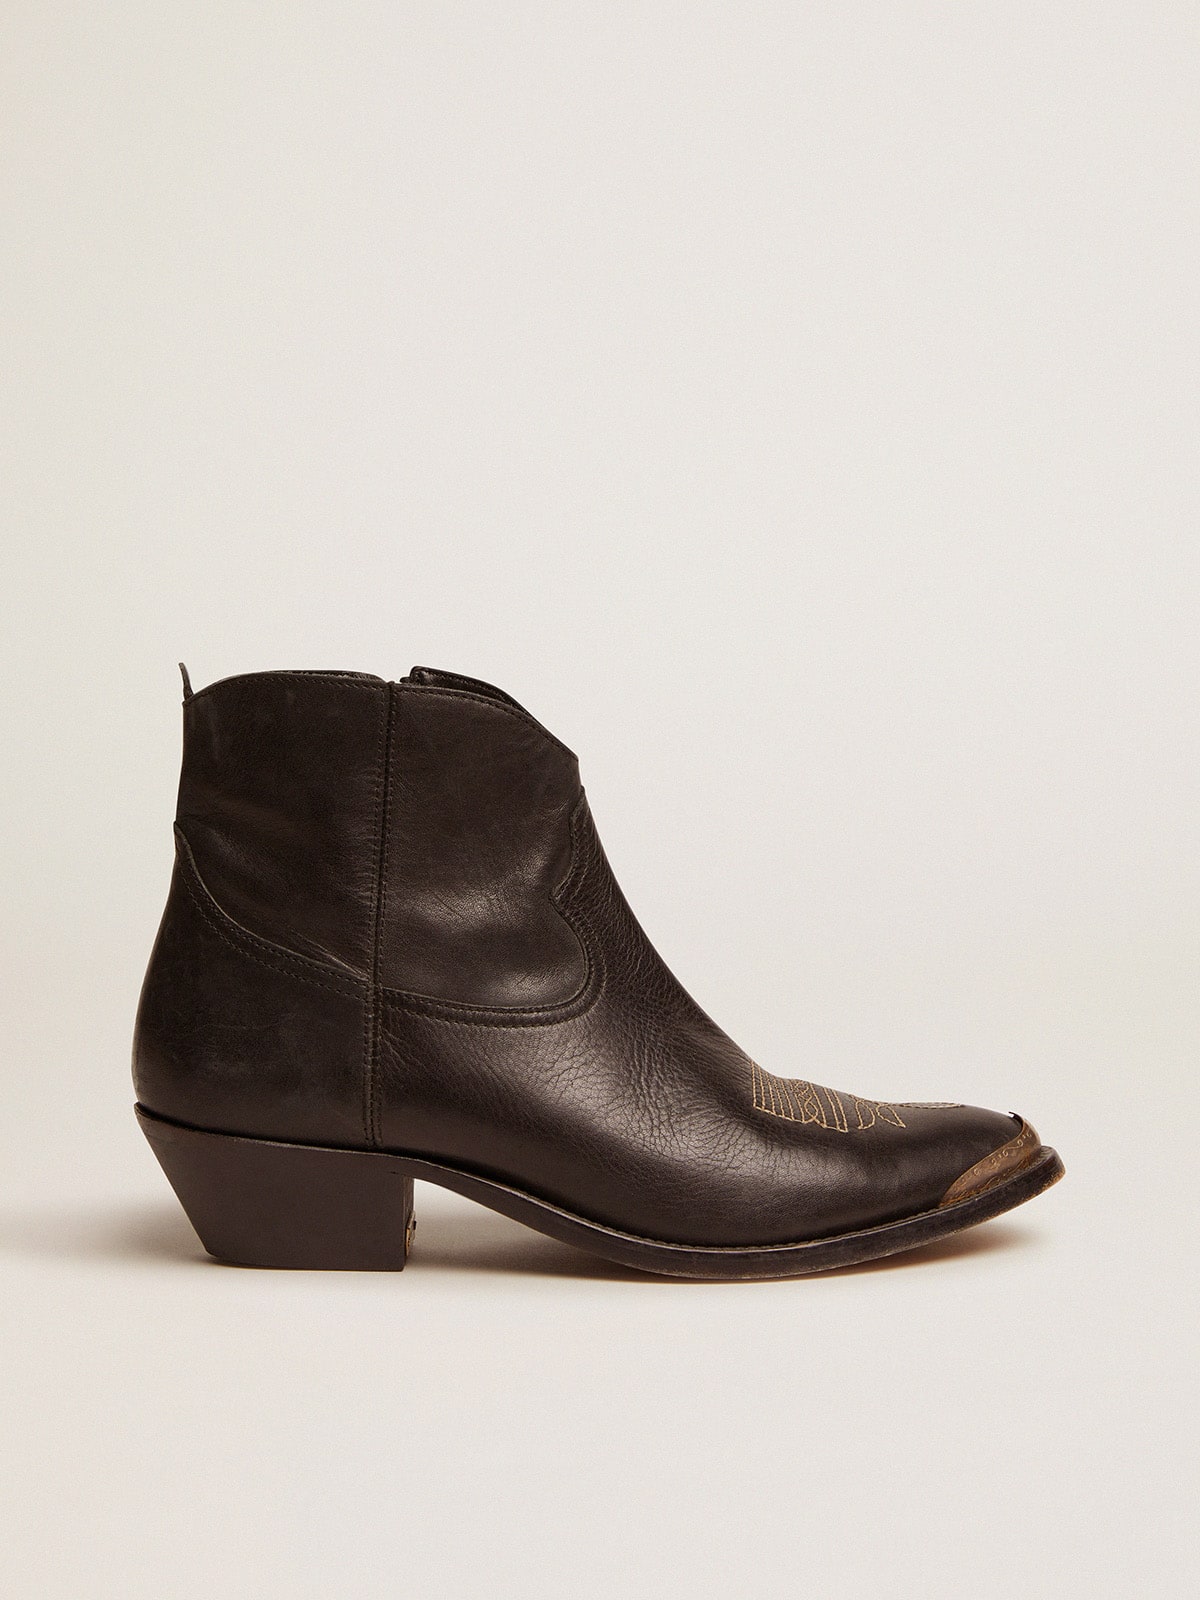 Womens boots: leather Texan boots and booties | Golden Goose